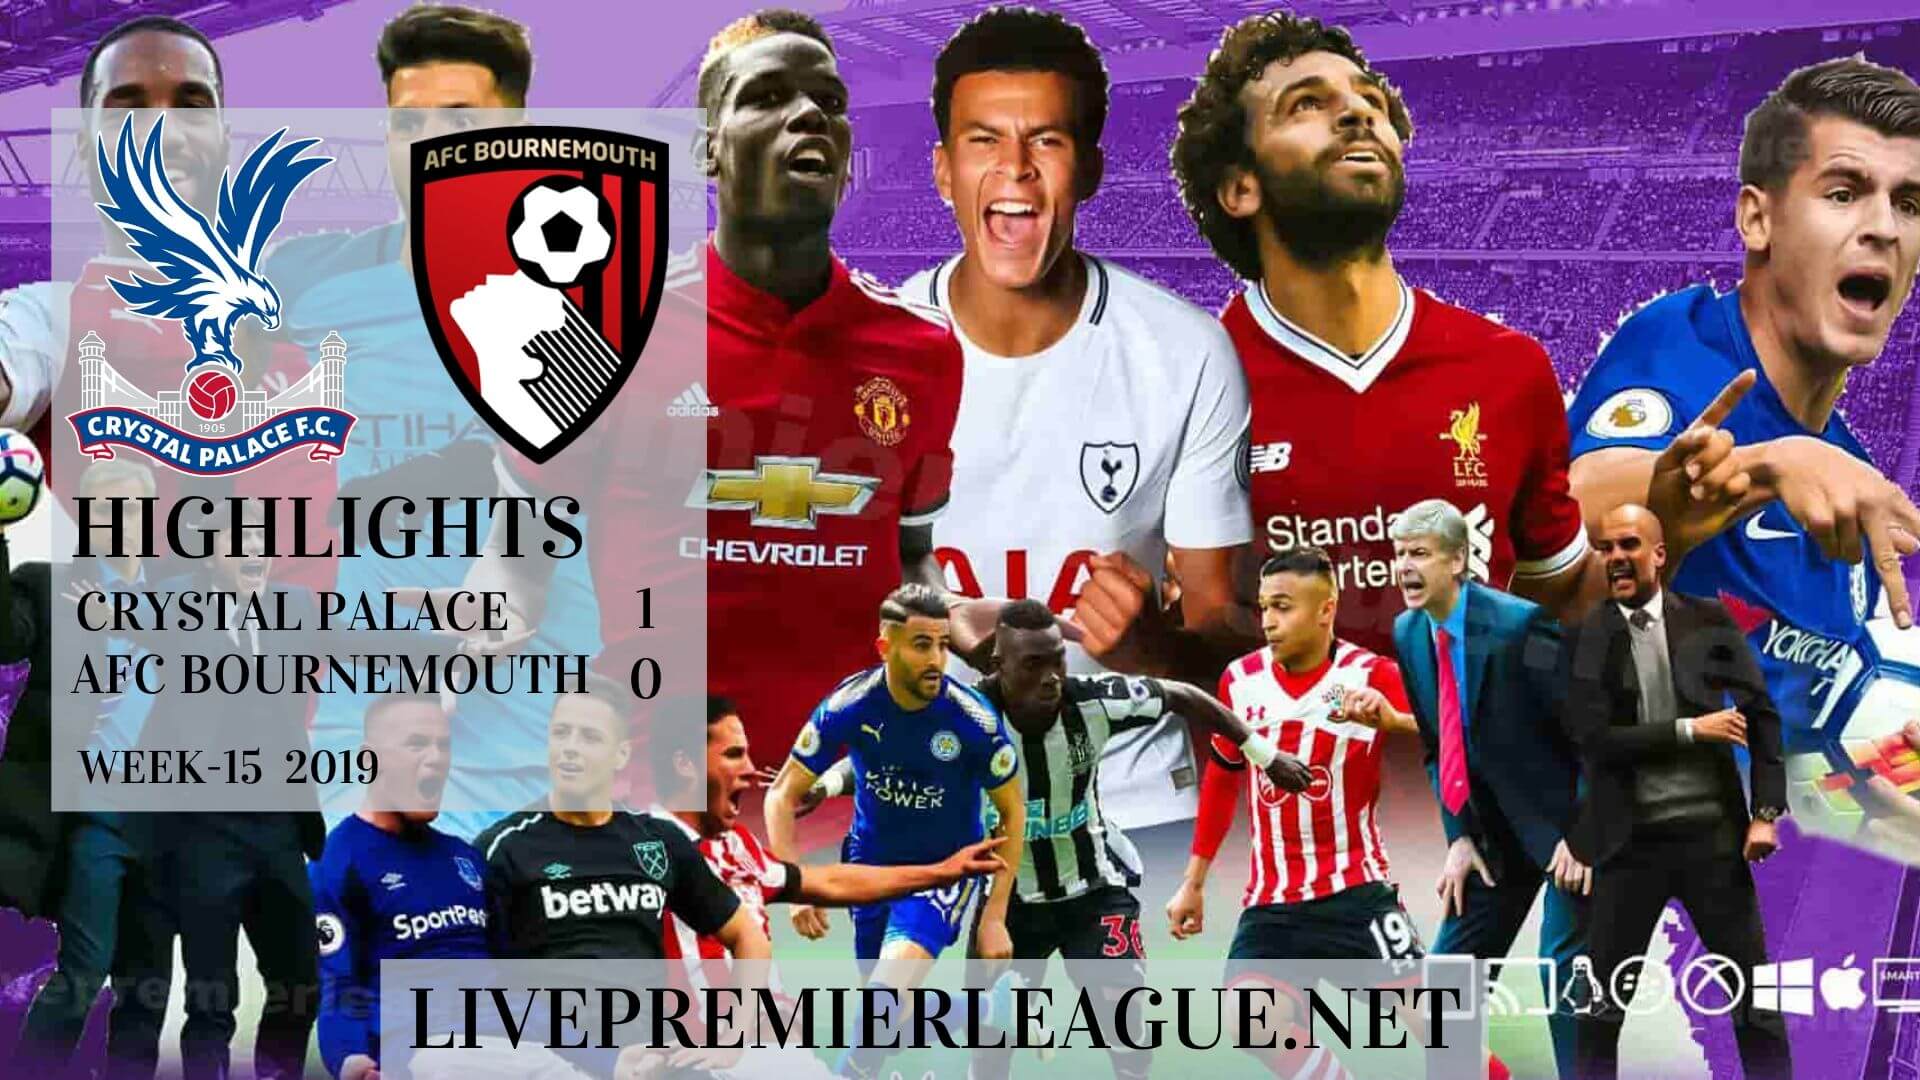 Crystal Palace Vs AFC Bournemouth Highlights 2019 Week 15